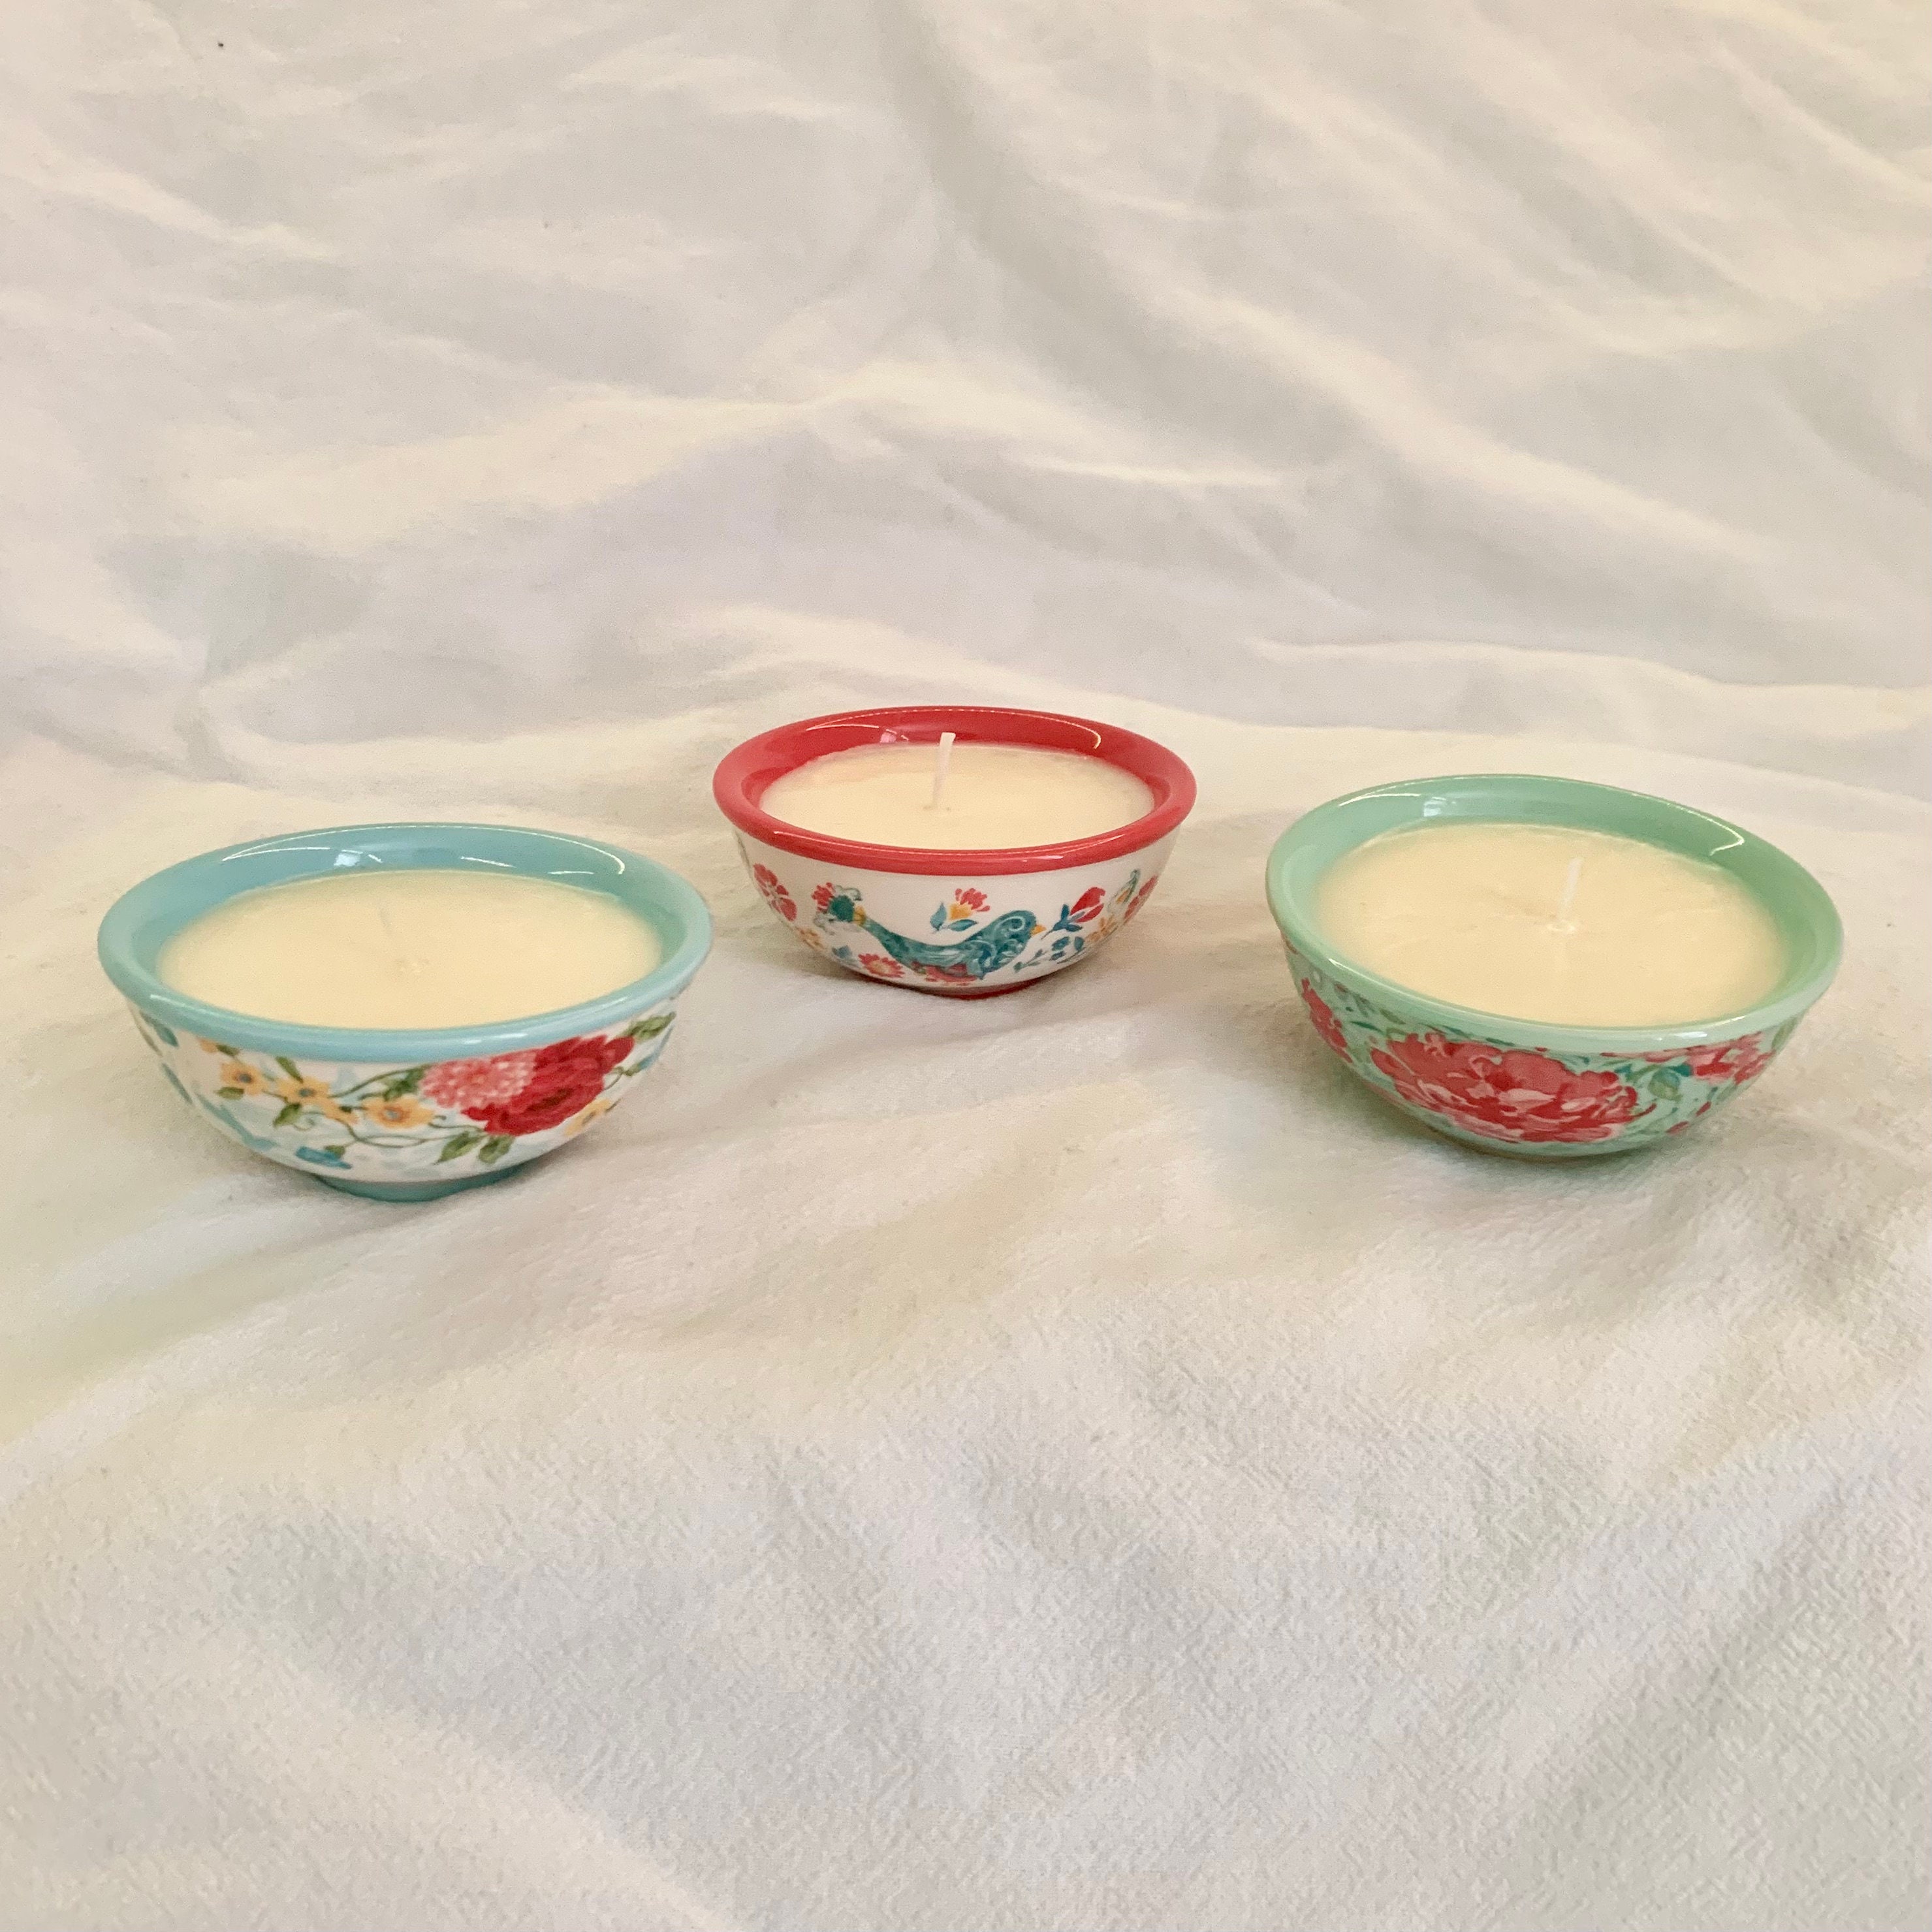 The Pioneer Woman Breezy Blossom 4 piece Measuring Bowls, NEW - Bowls, Facebook Marketplace